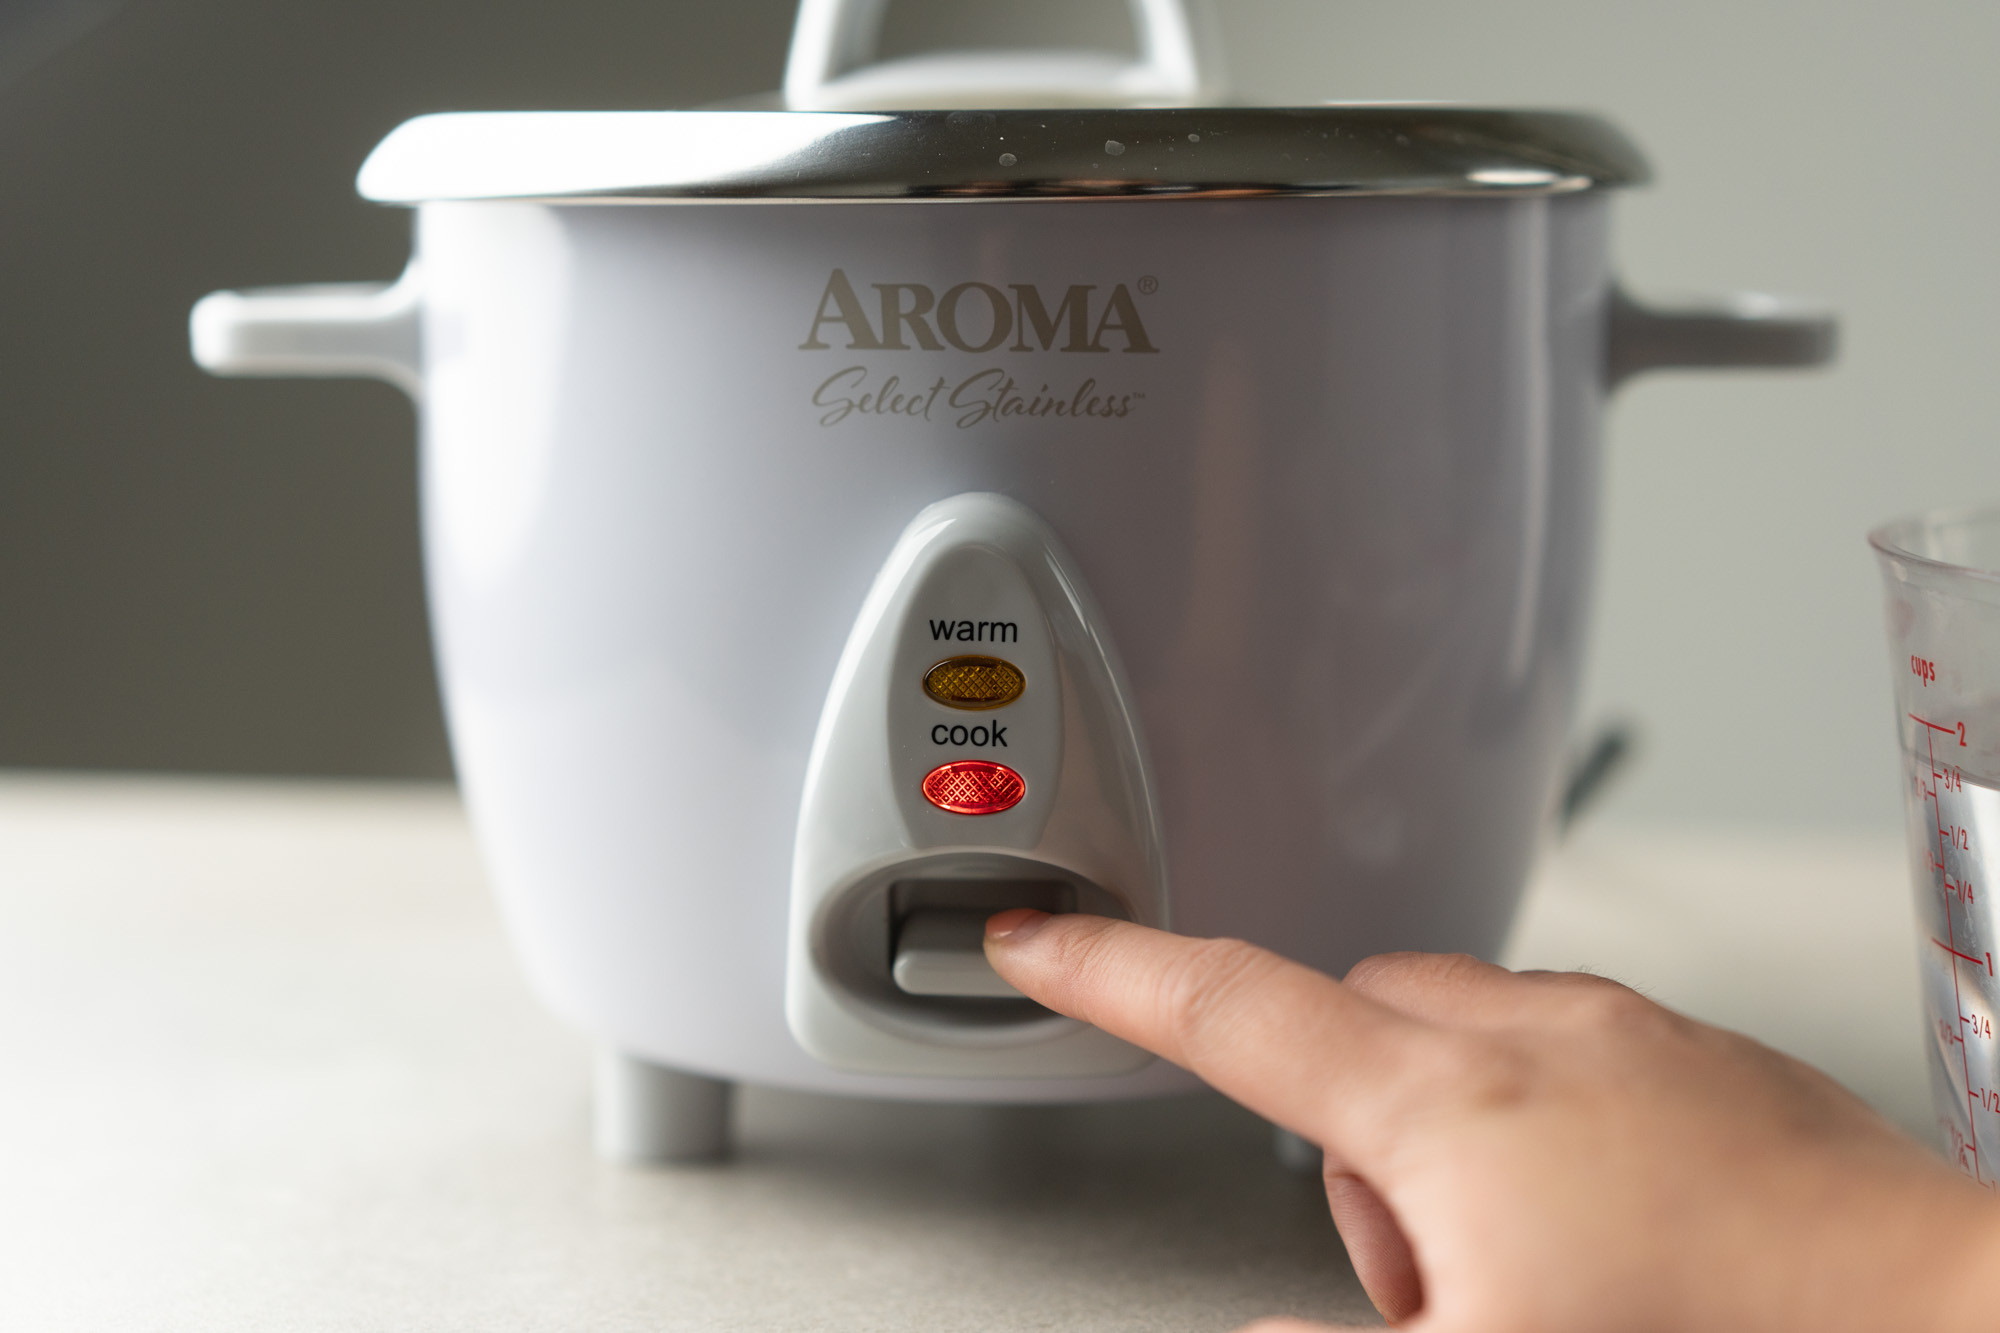 4 cups Aroma Rice cooker. 